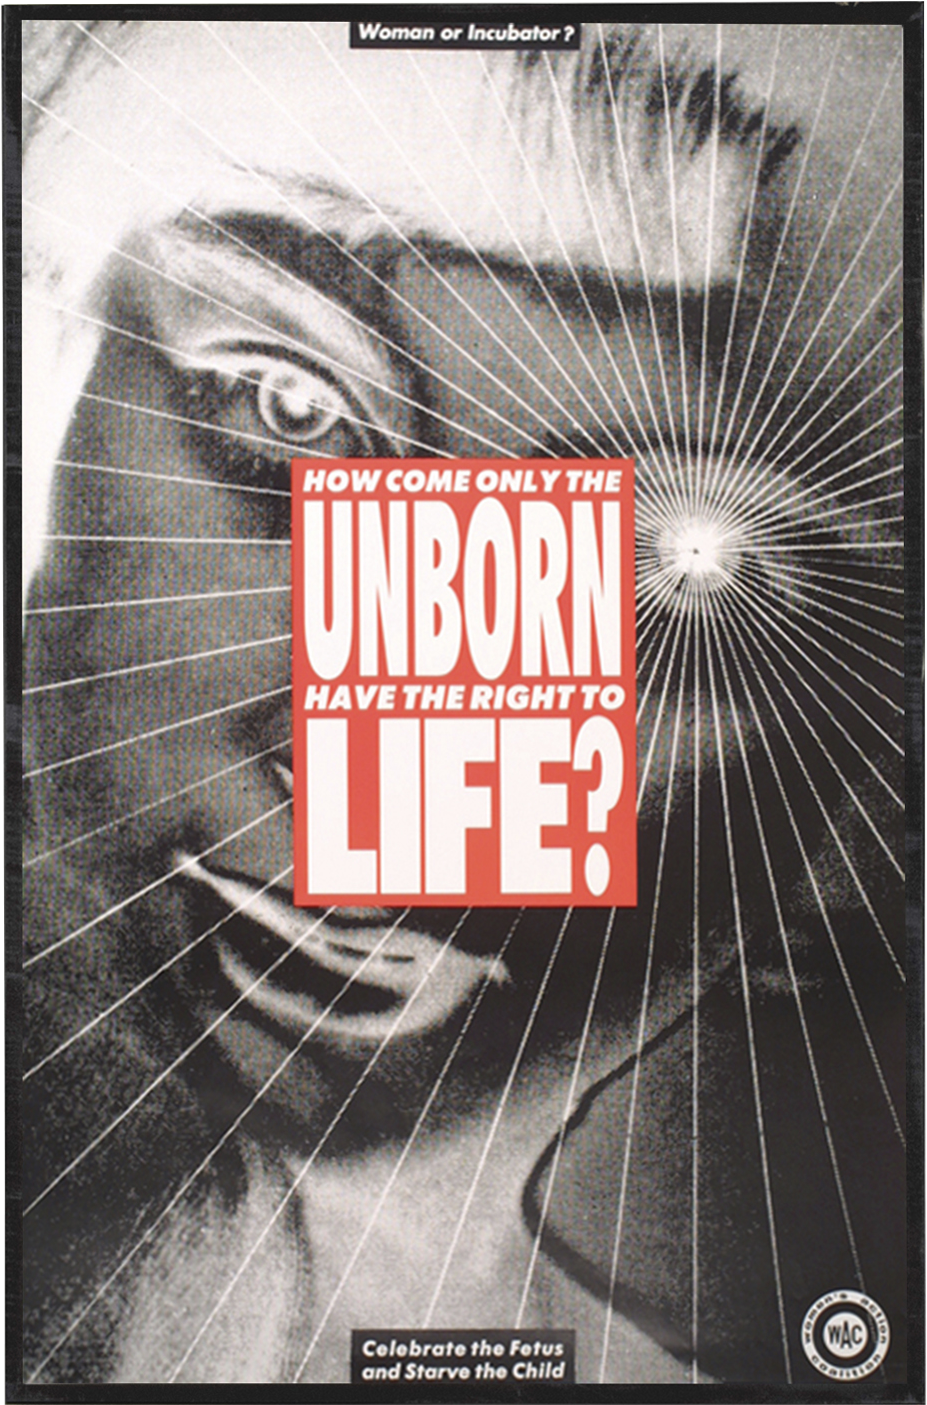 Barbara Kruger - How come only the unborn have the right to life?, 1992